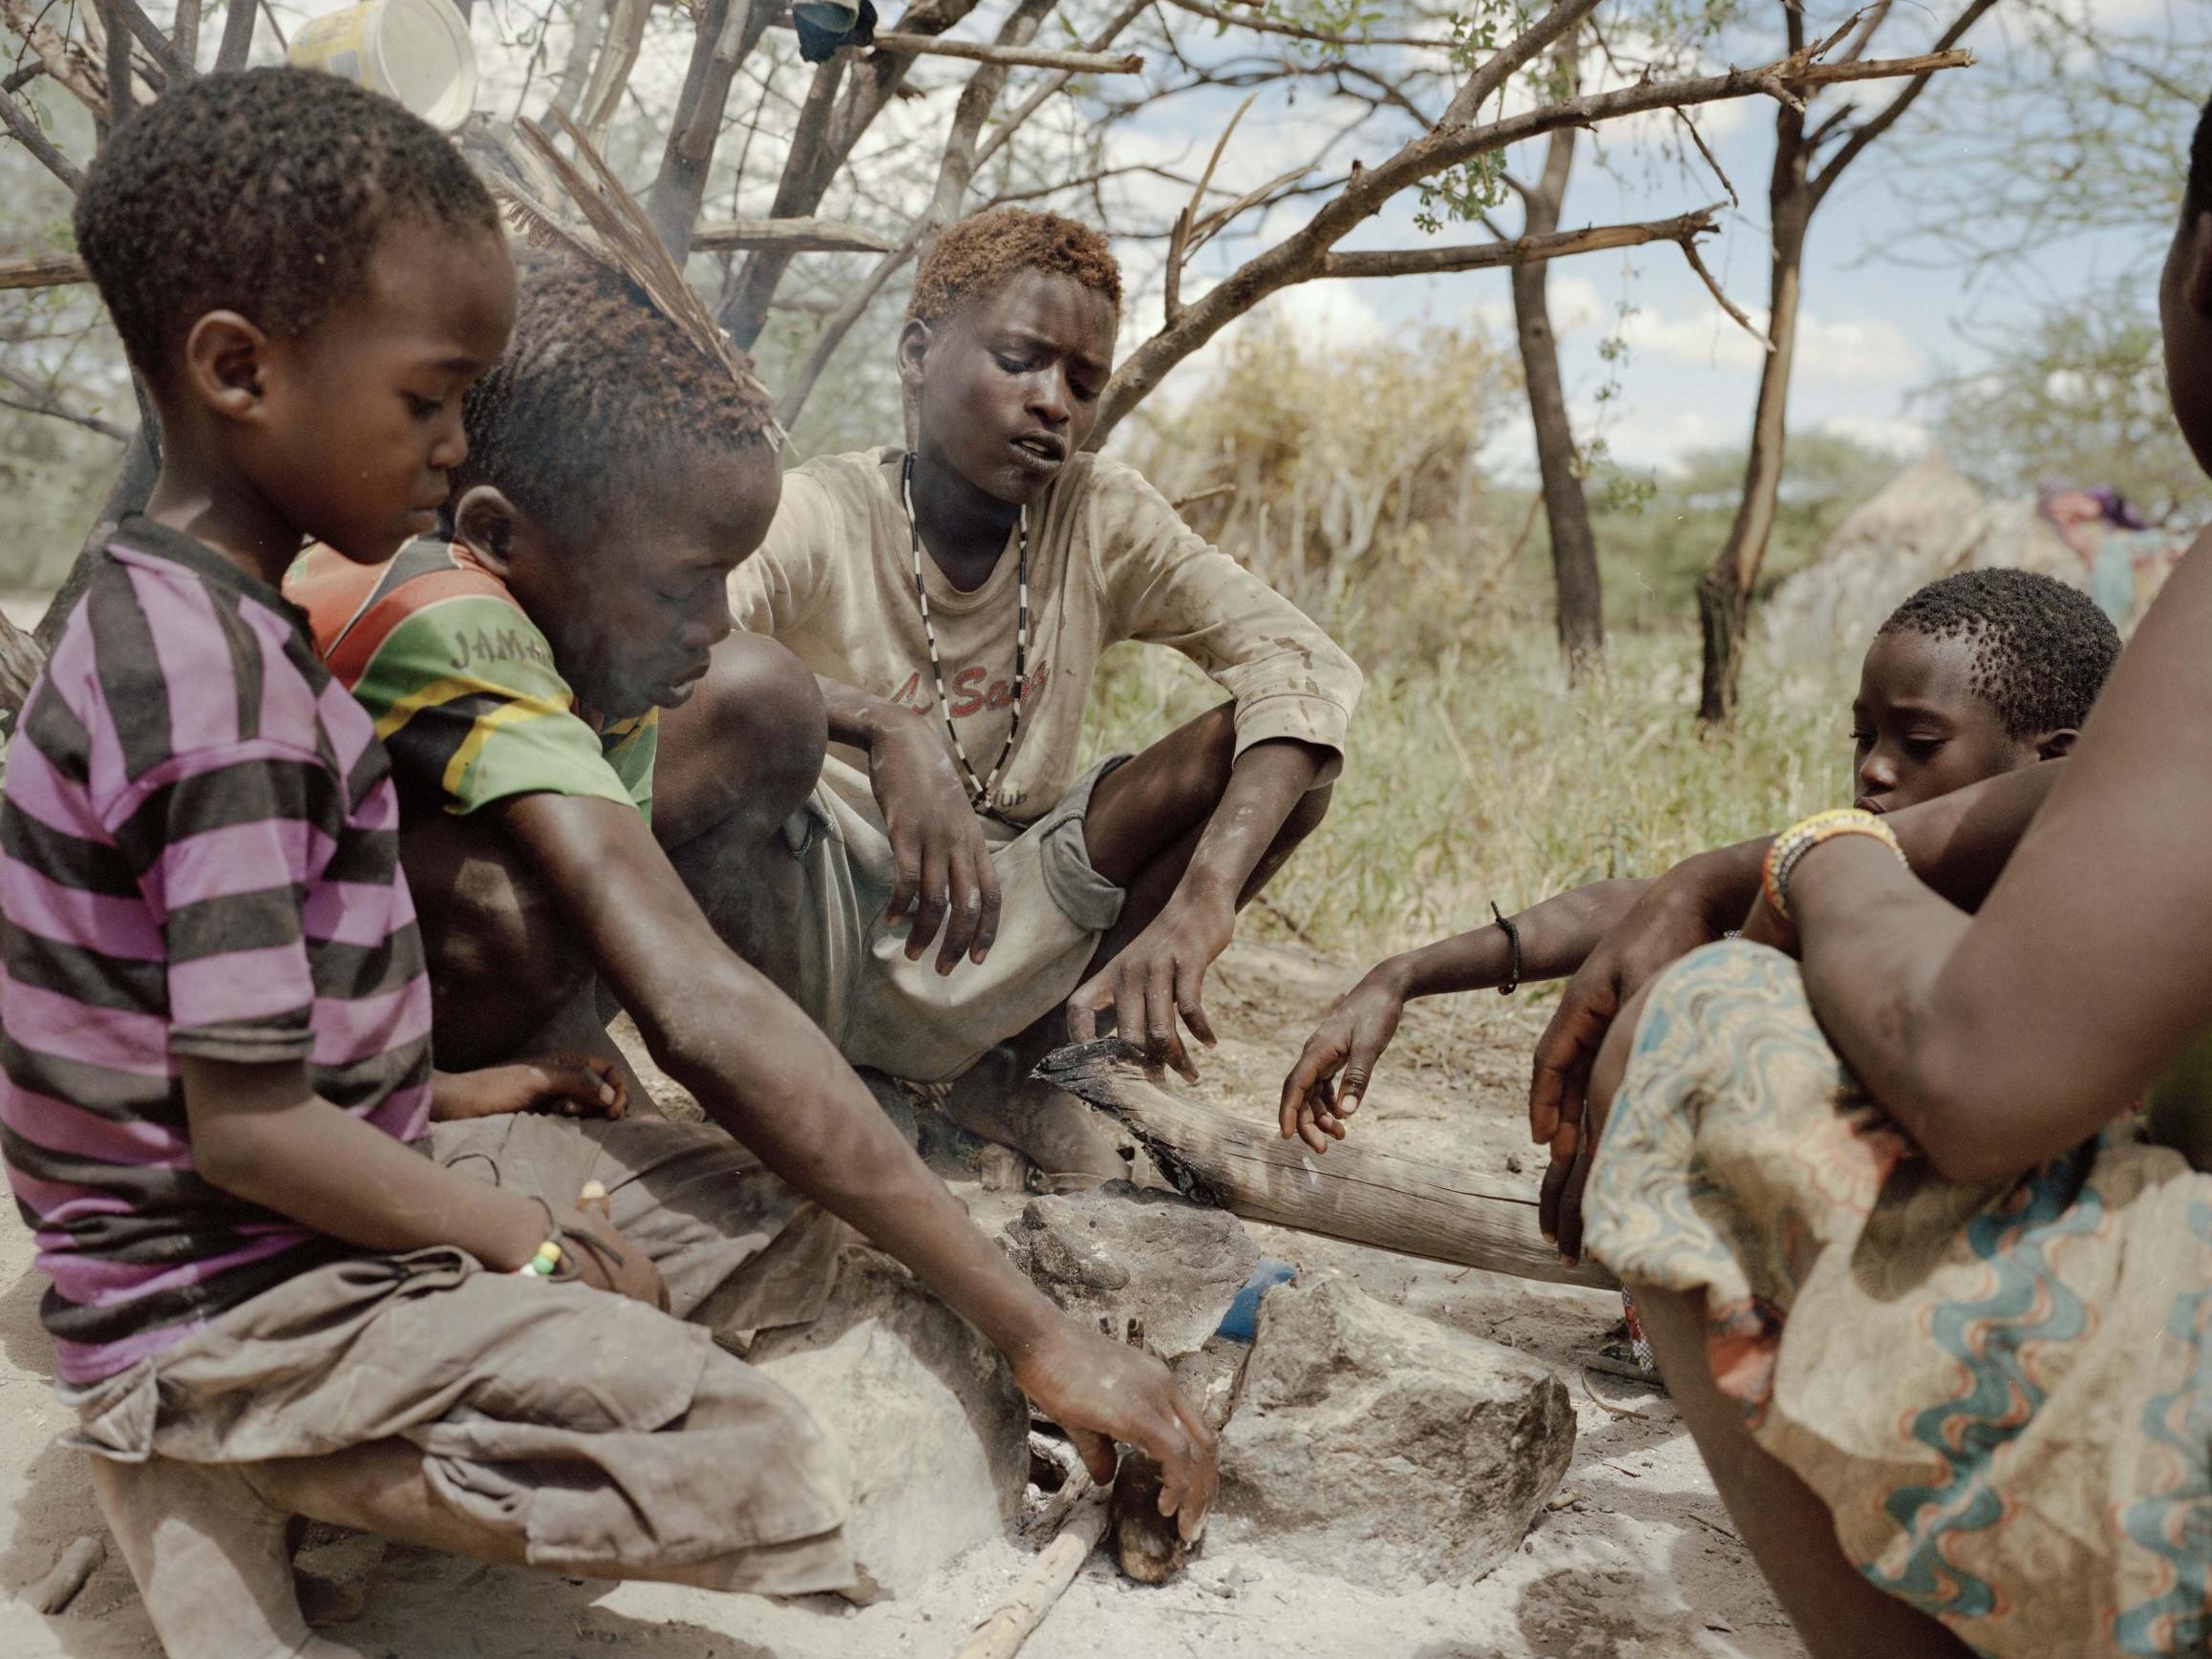 Researchers found that the Hadza would often sit on the ground but also frequently squatted